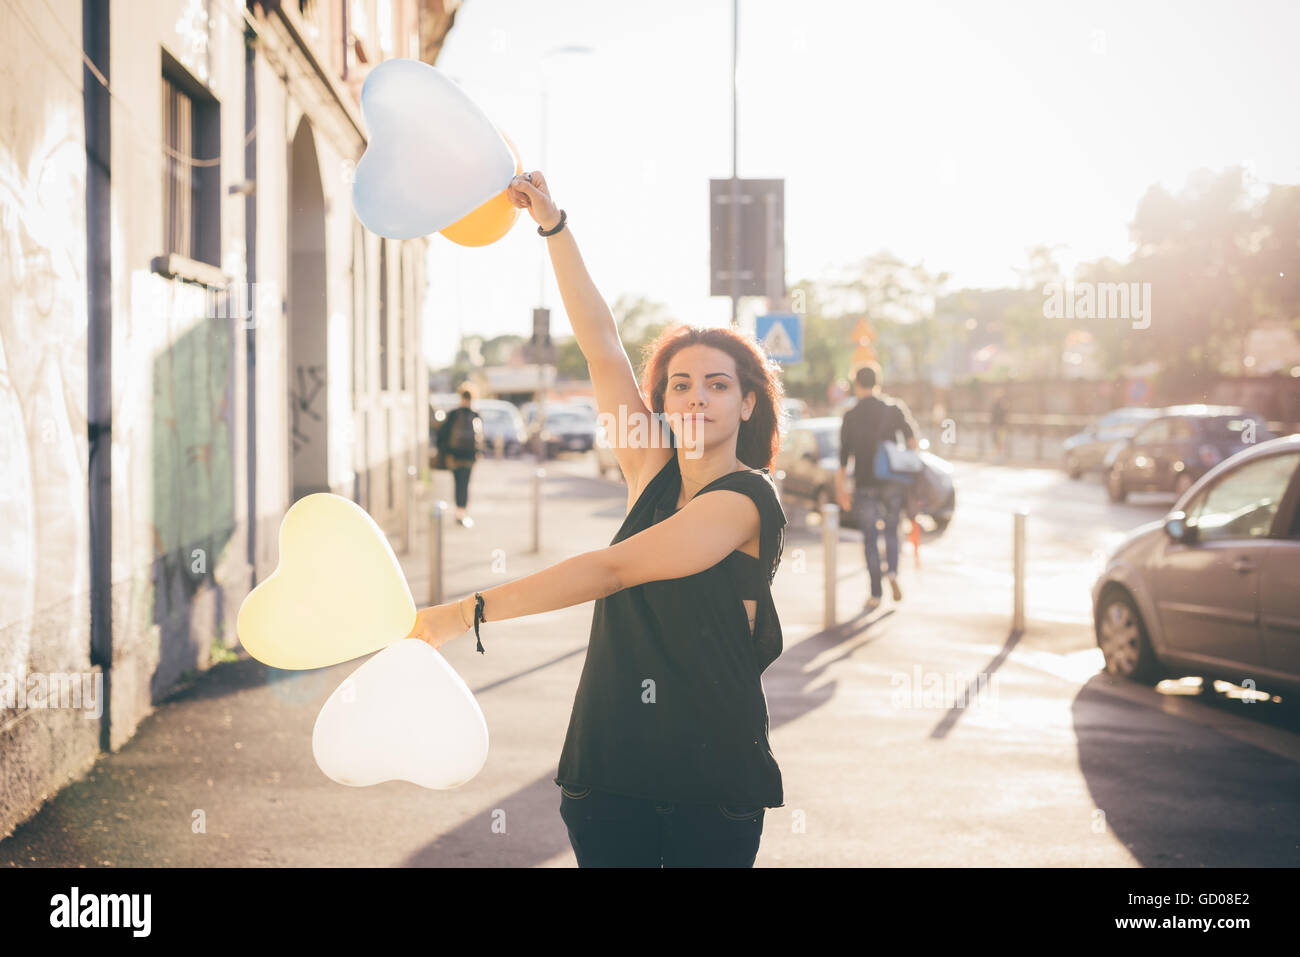 Half length of a young reddish brown hair caucasian woman playing in the street with baloon in shape of heart - youth, childhood, carefreeness concept - dressed with black shirt Stock Photo